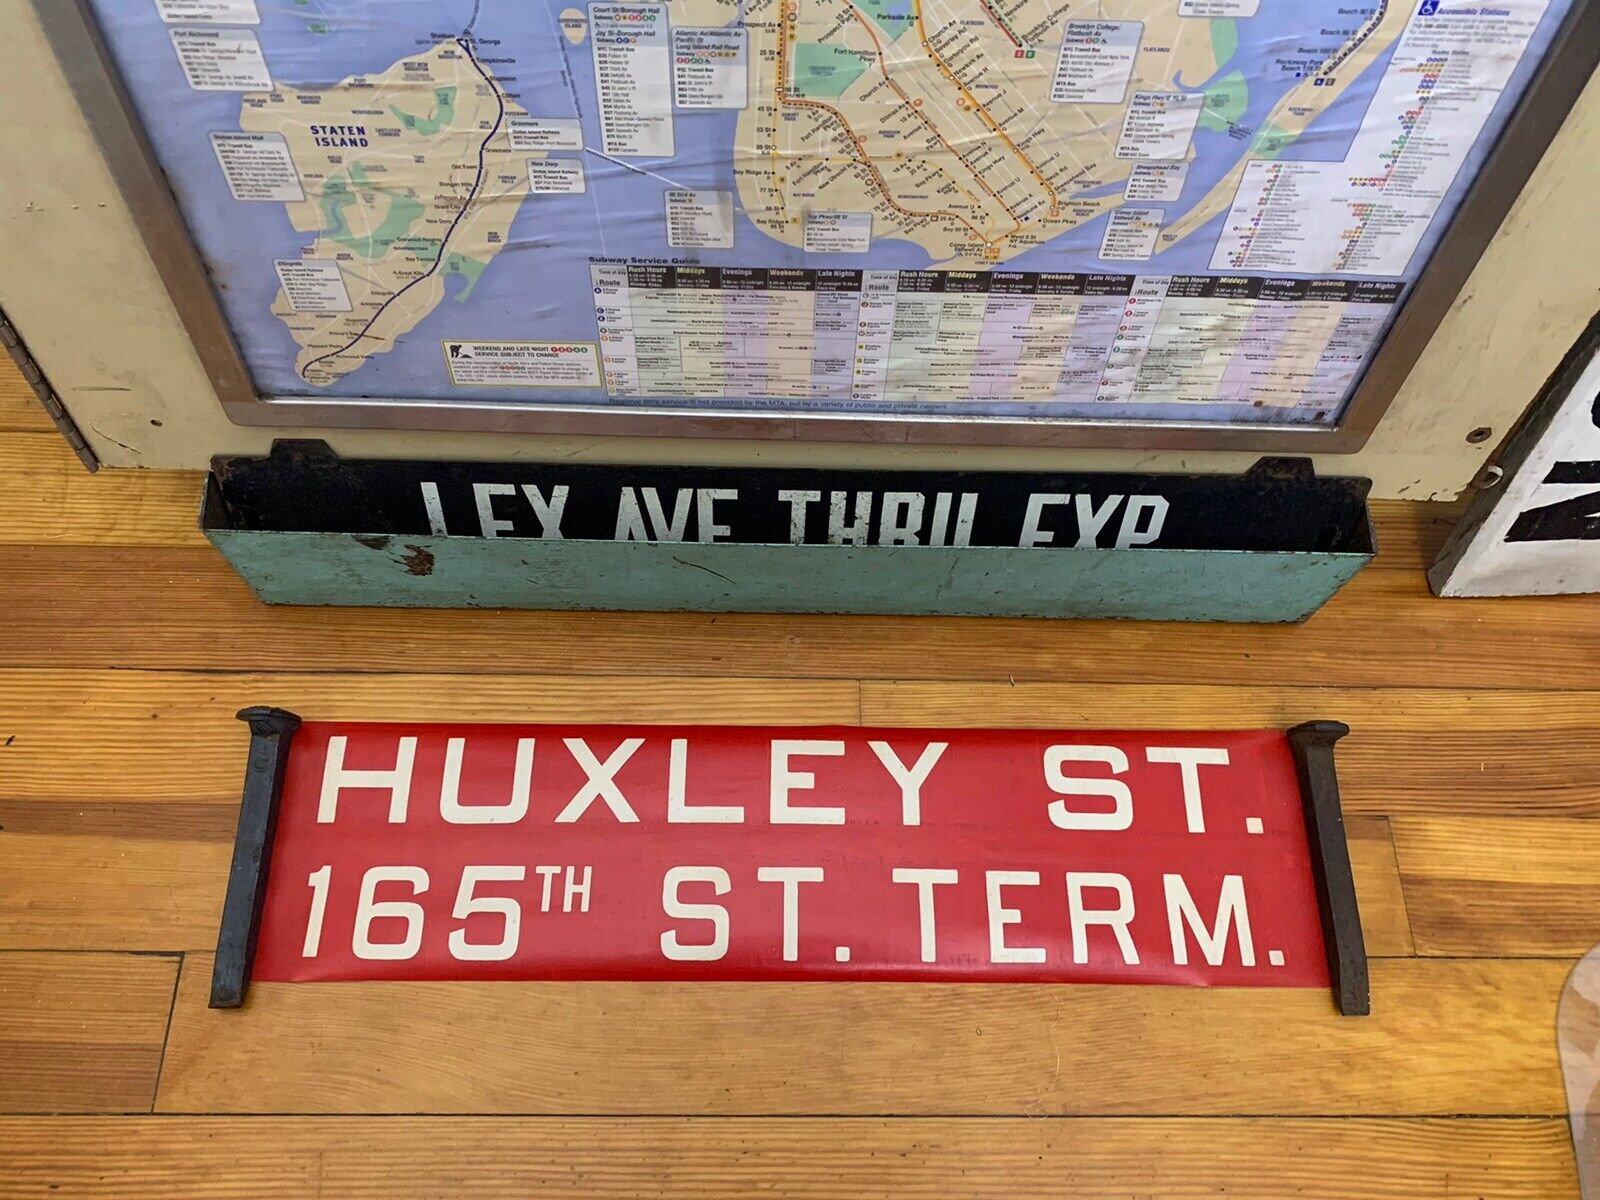 QUEENS TRANSIT 1952 NY NYC BUS ROLL SIGN HUXLEY STREET 165th ST TERMINAL MERRICK